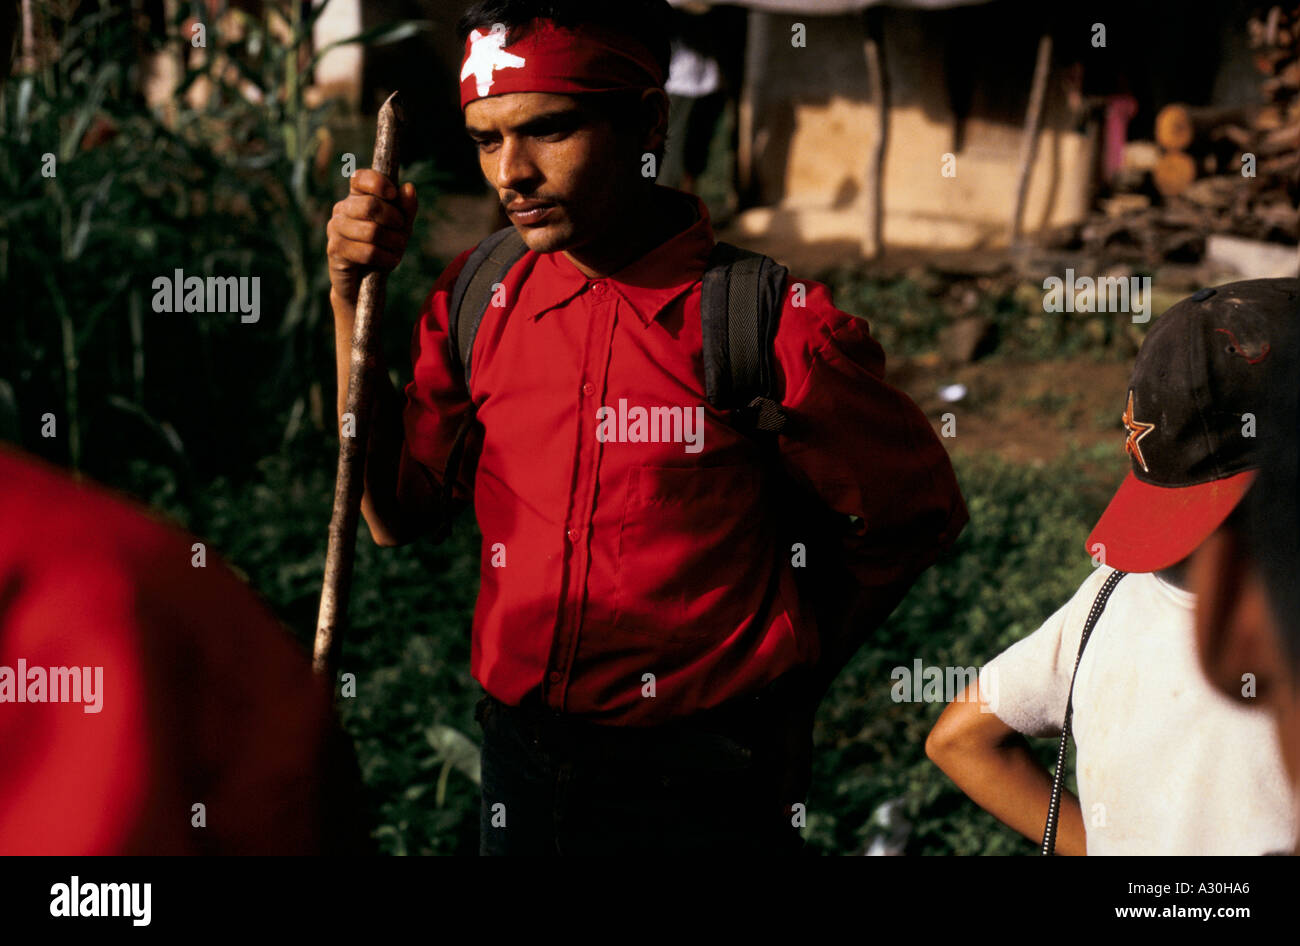 A Maoist rebel cadre with a red shirt and bandana waits to rally in Sailunswor village Dolakha region Nepal Stock Photo